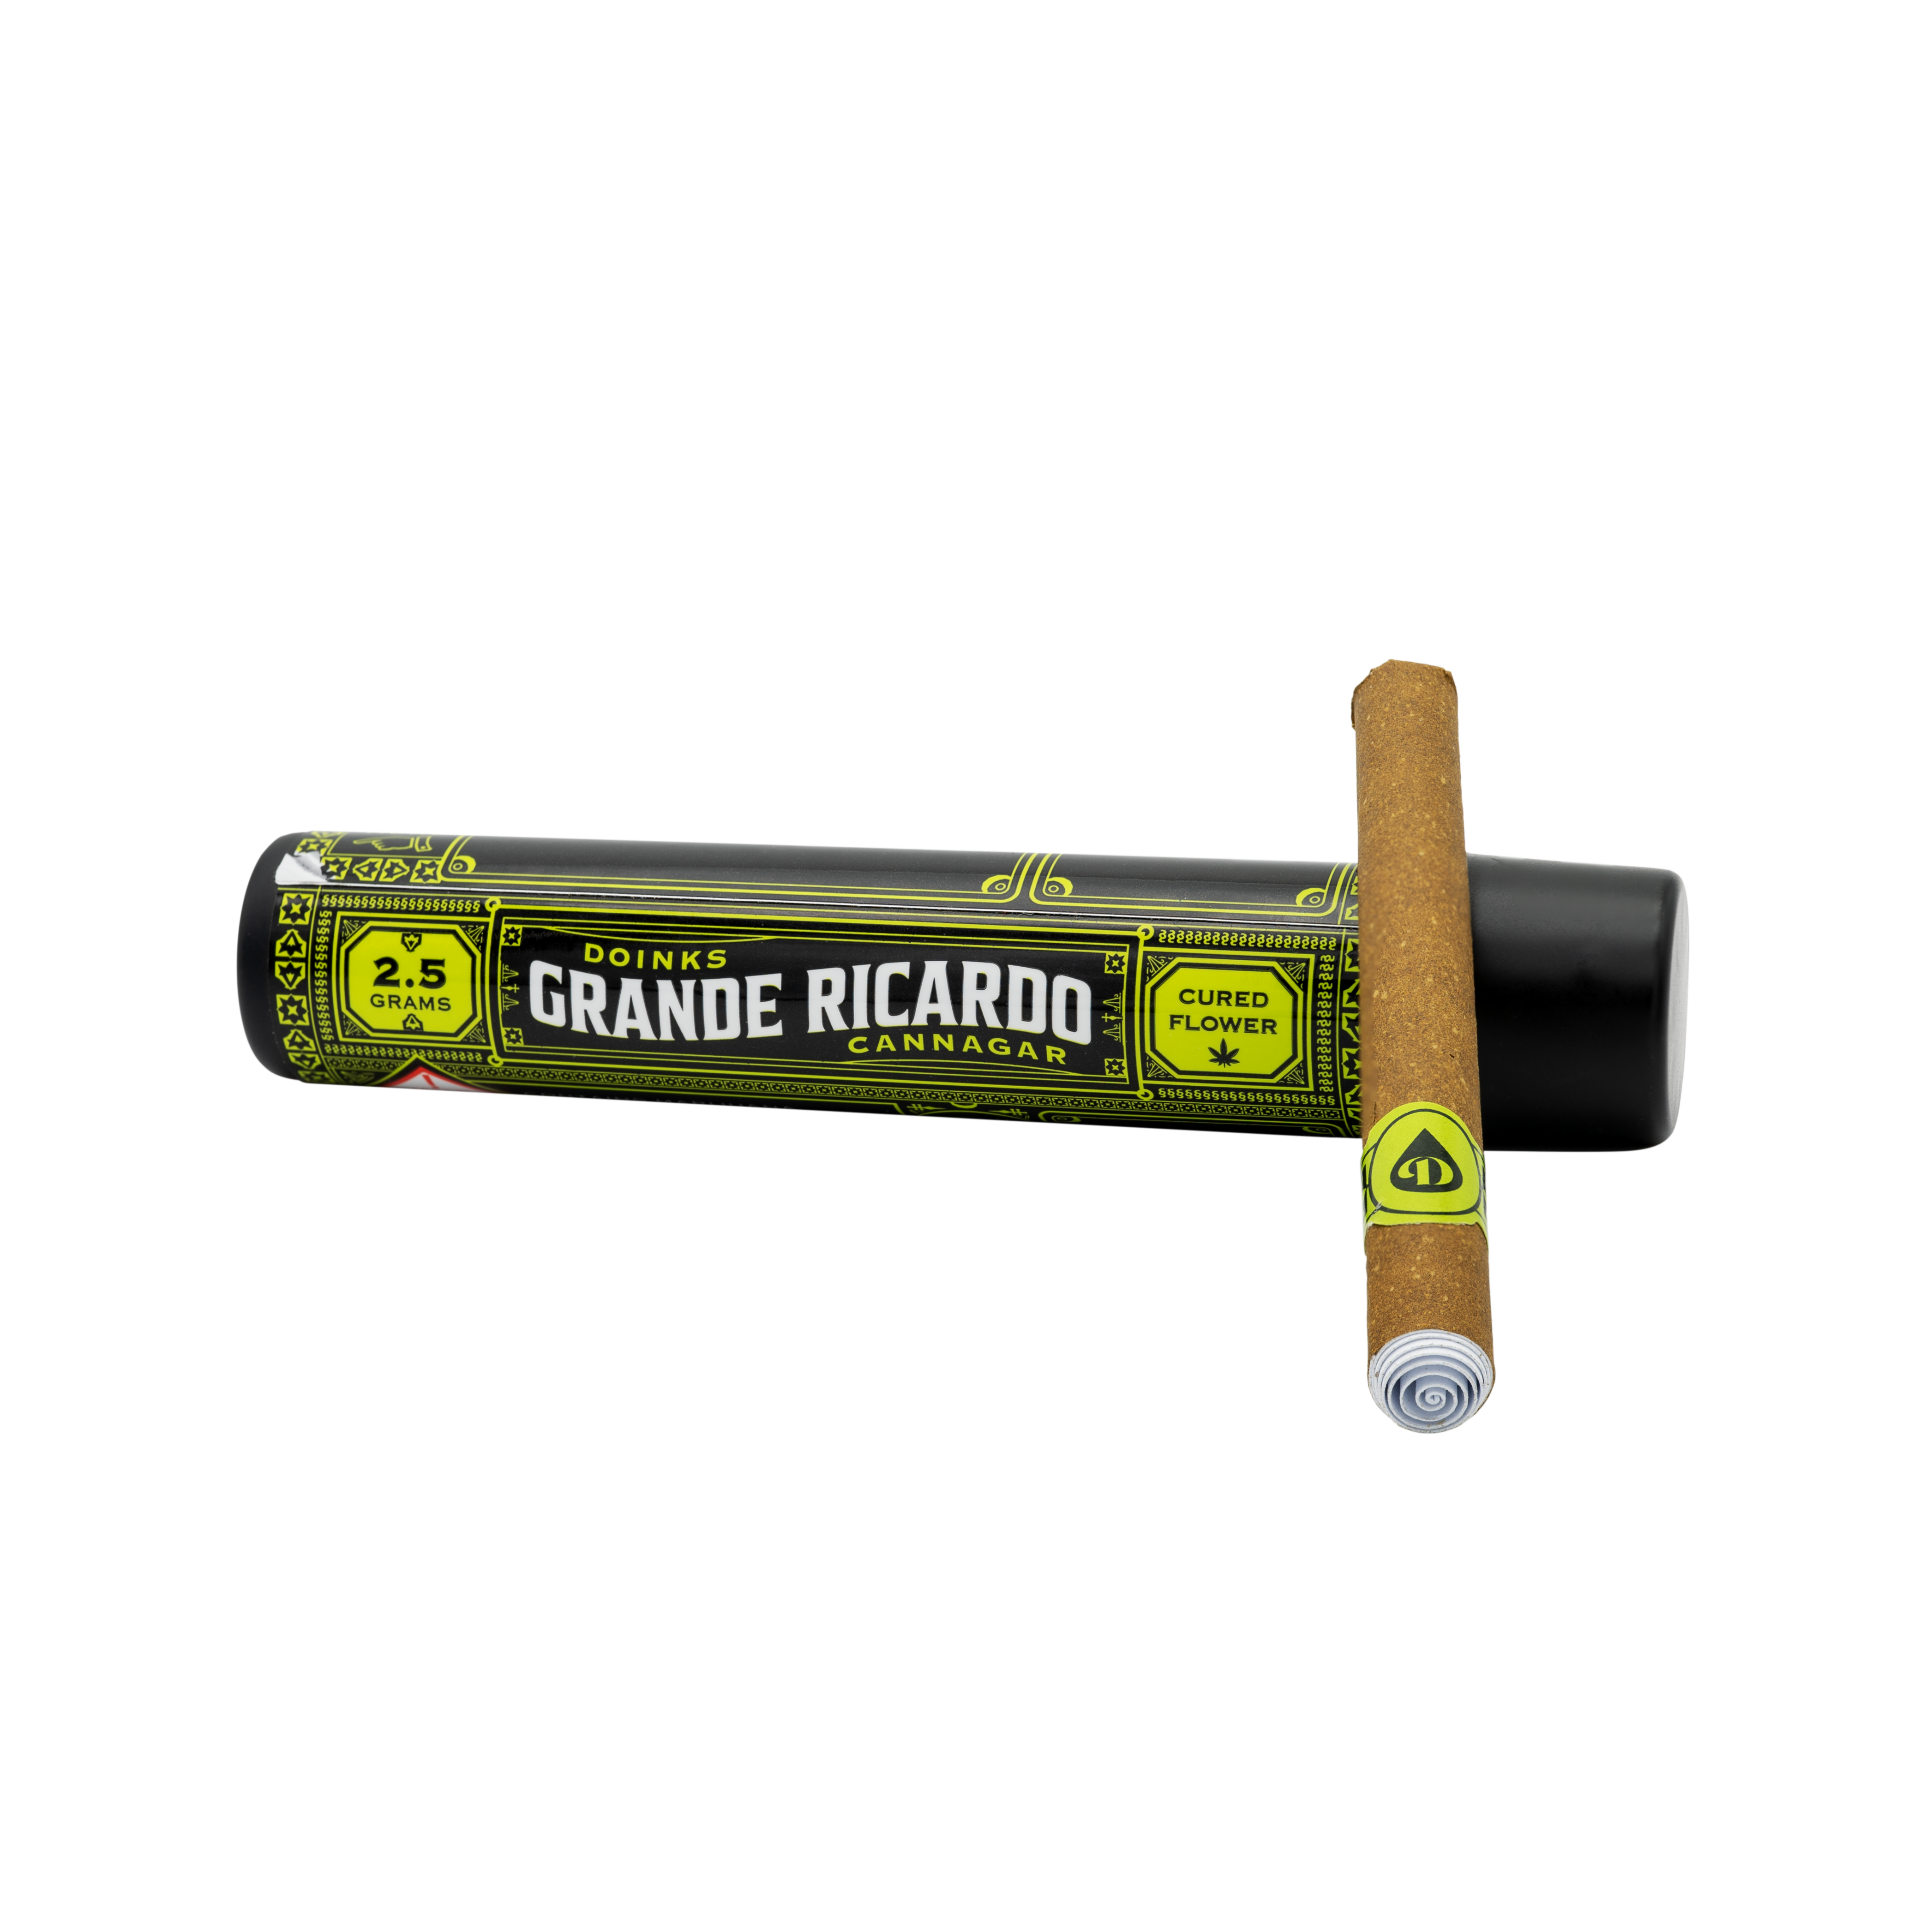 Live Resin Cannagar next to blunt tube